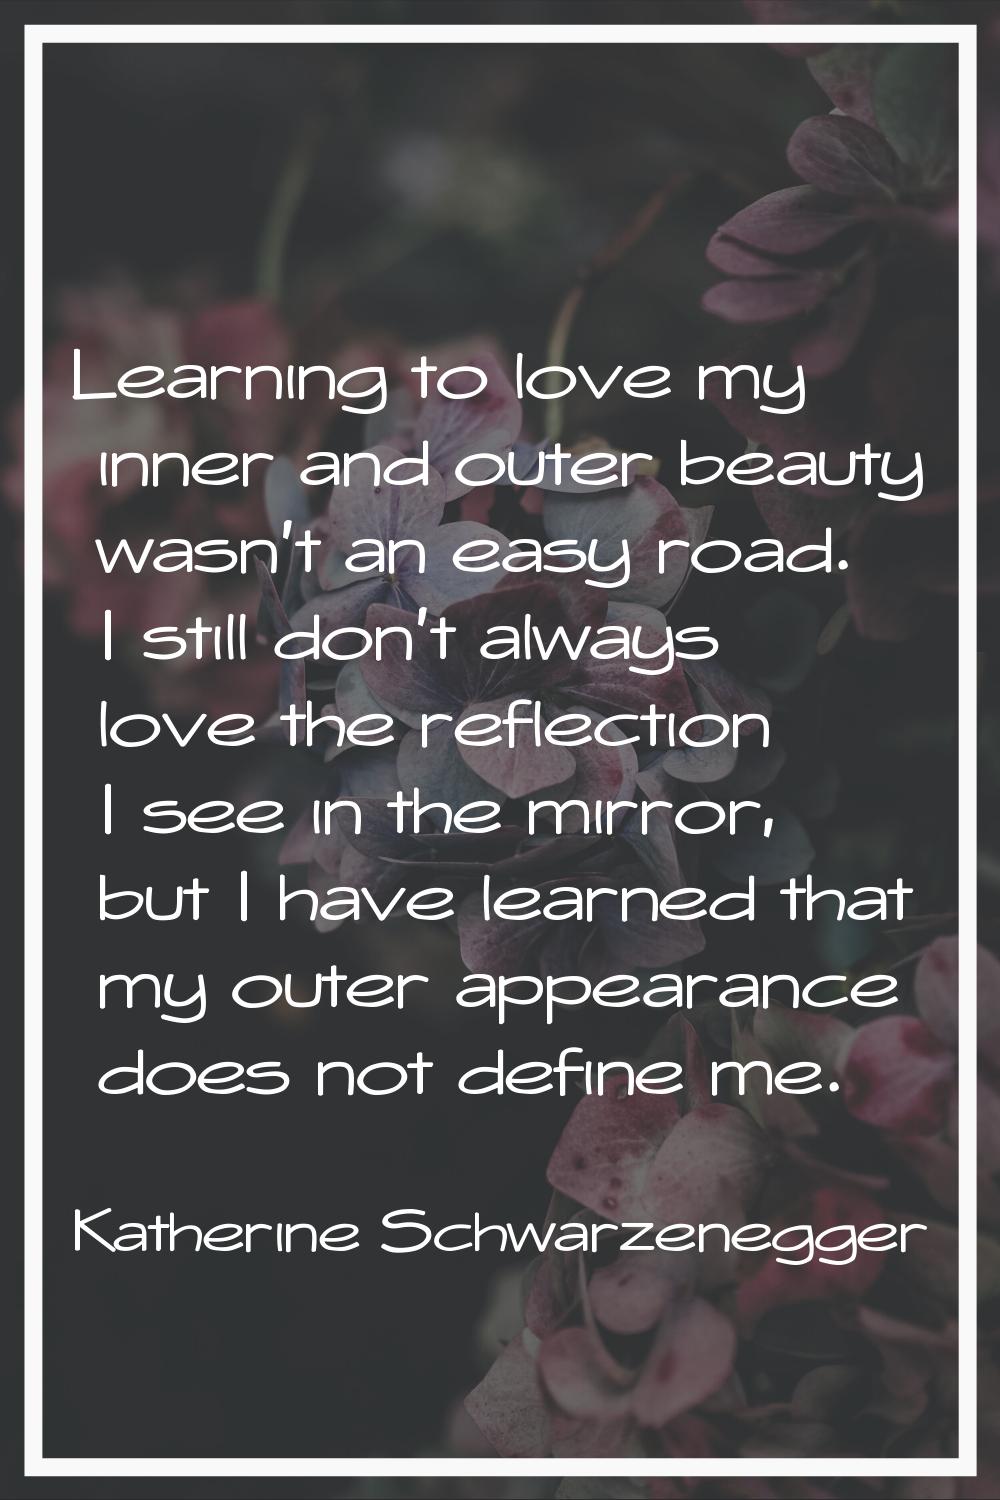 Learning to love my inner and outer beauty wasn't an easy road. I still don't always love the refle